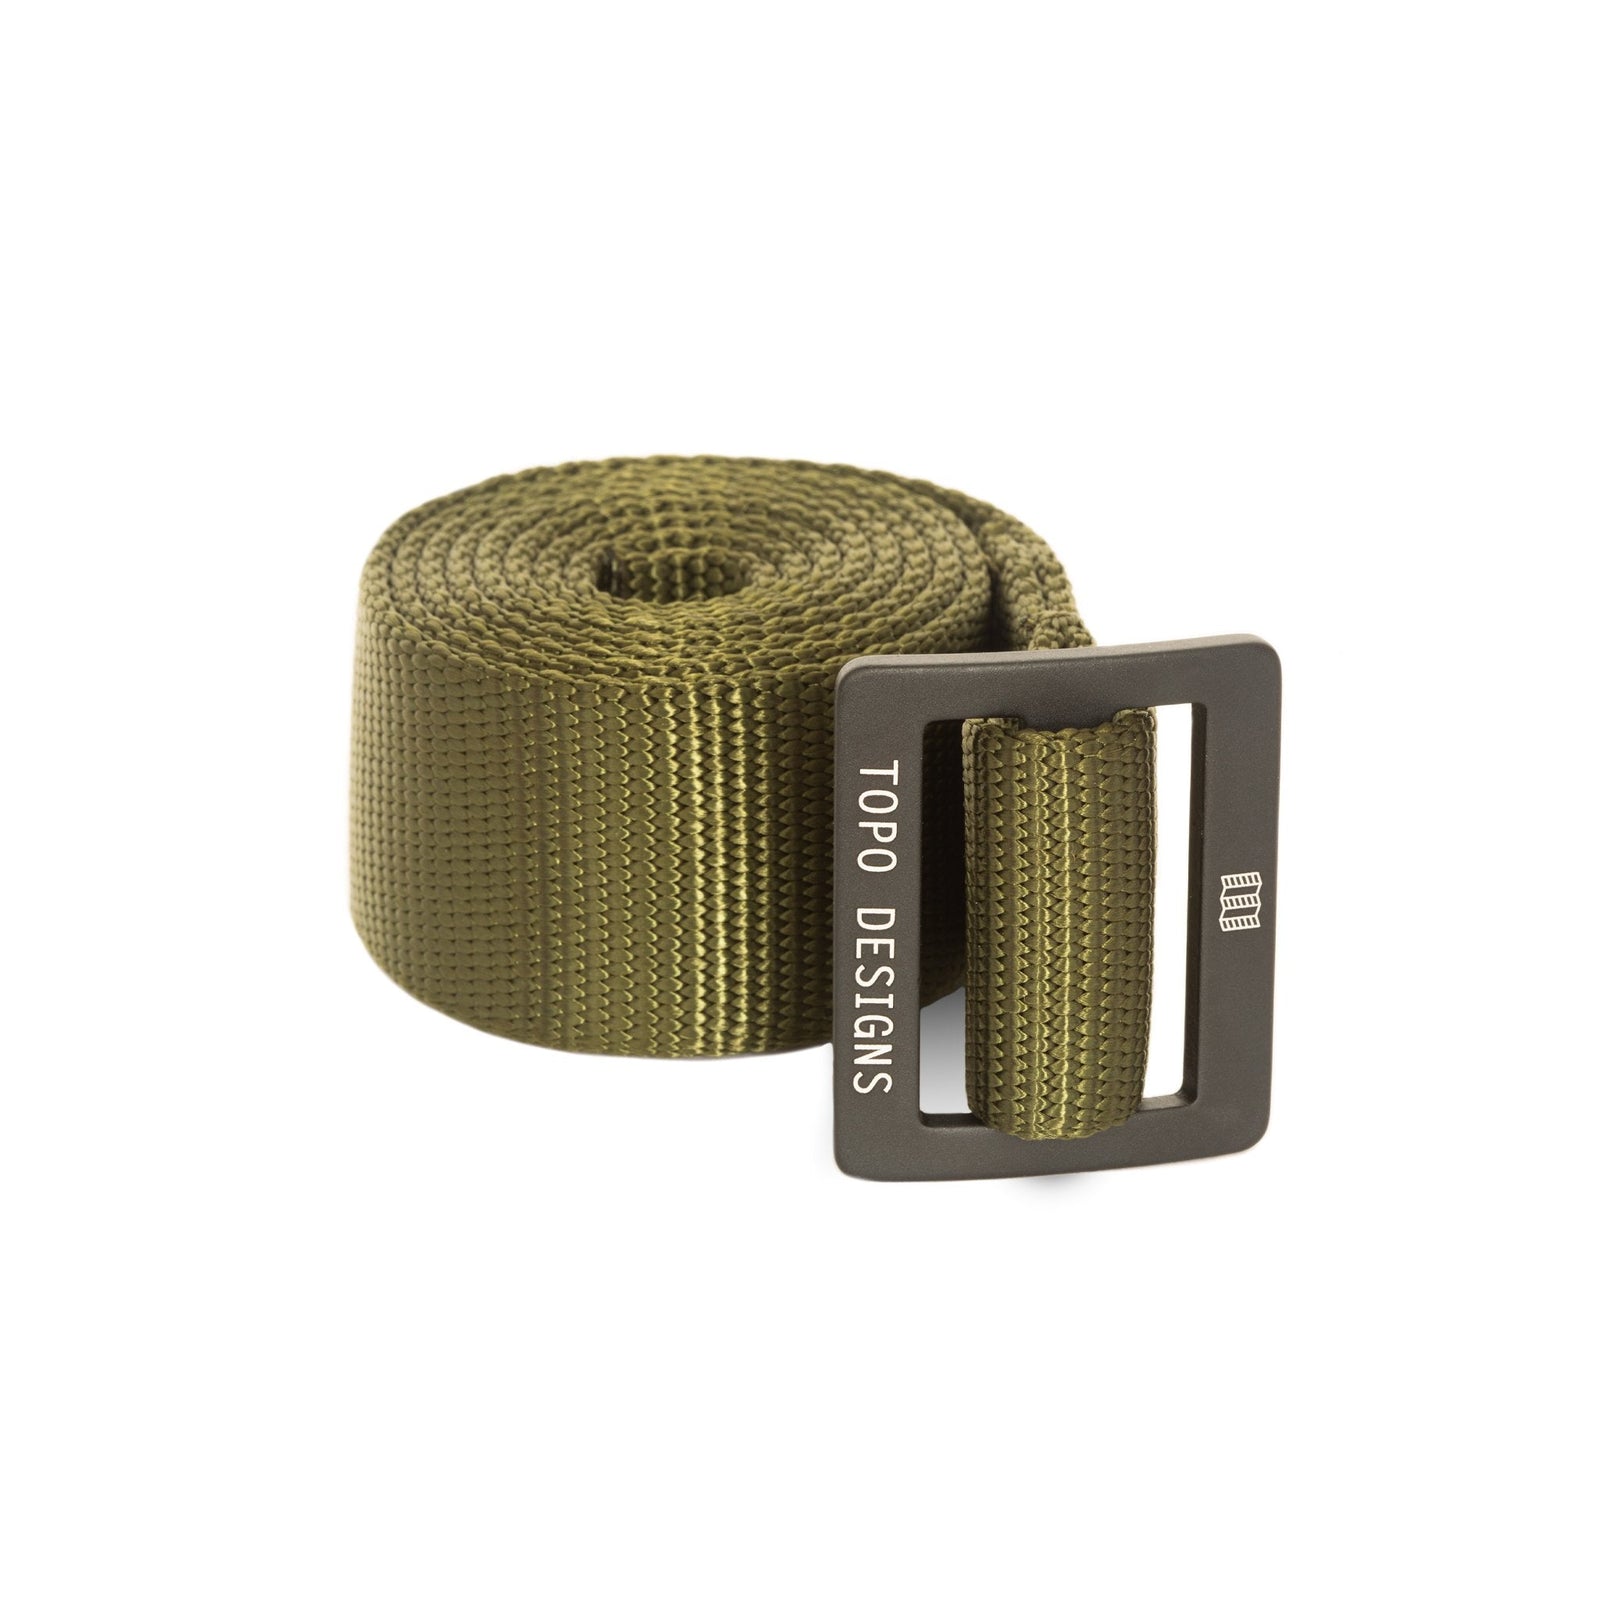 Topo Designs web belt in "olive" green with black buckle